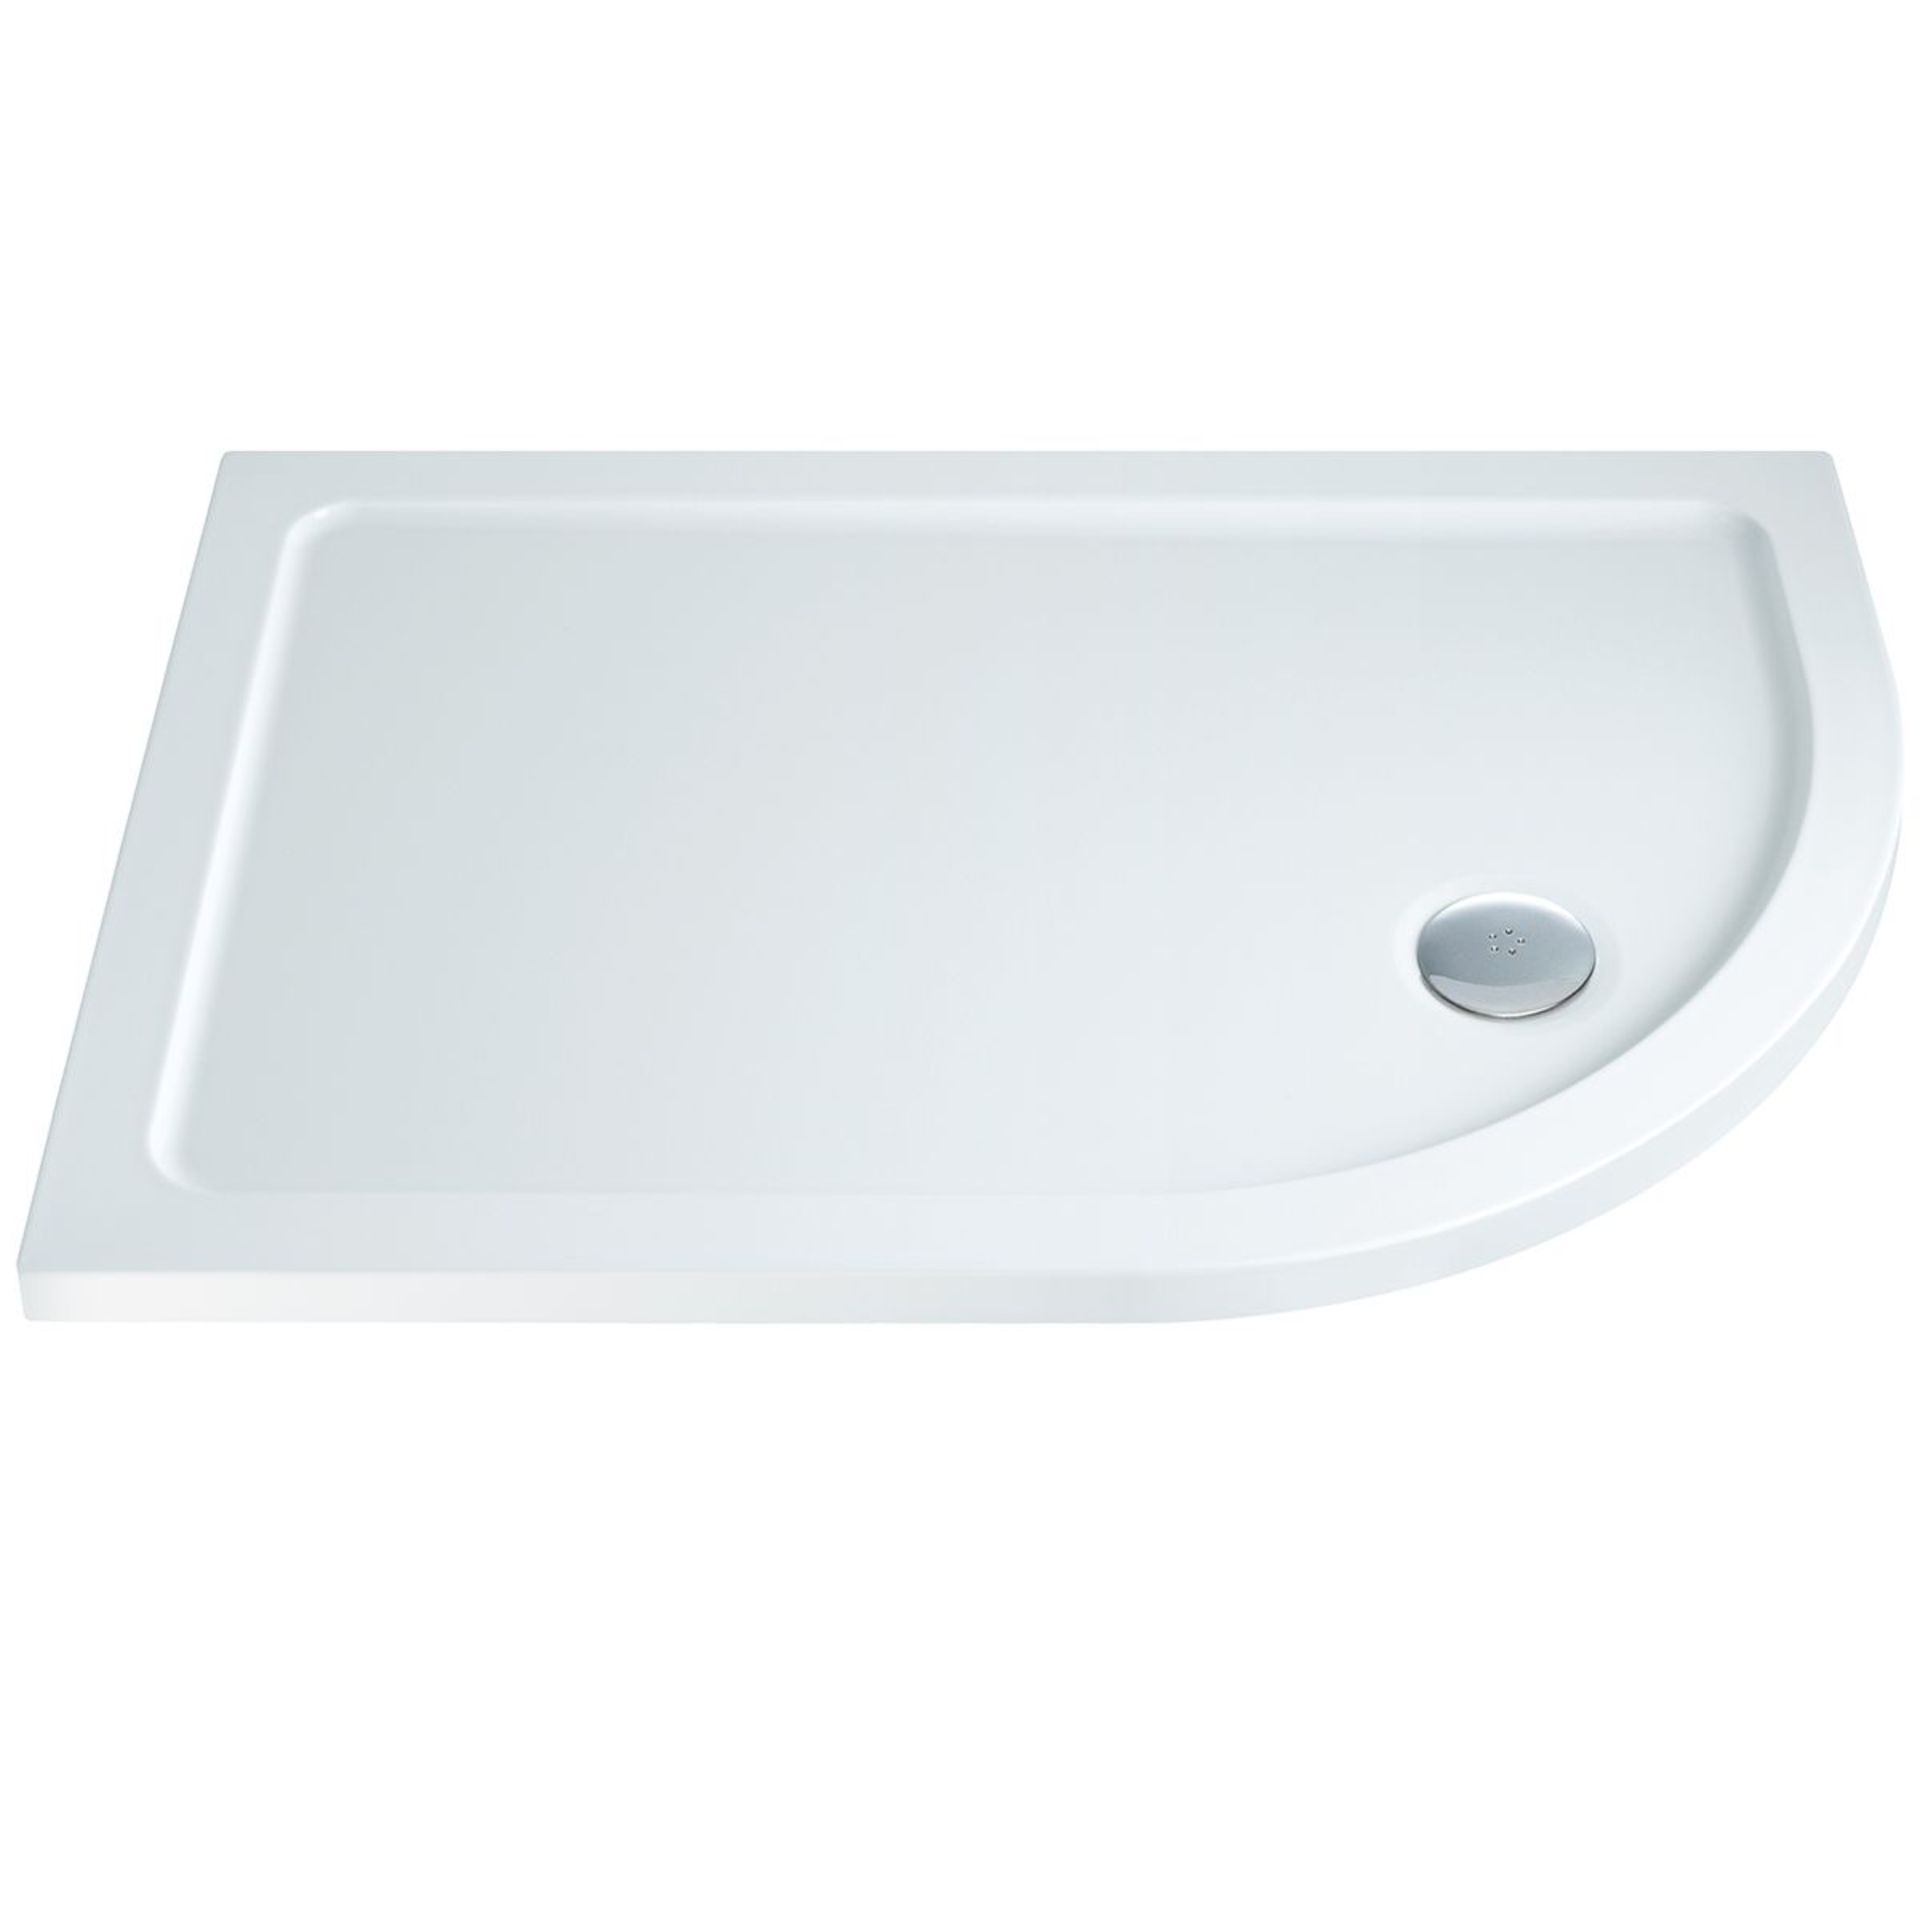 (AX44) New 1200 x 900 Quadrant Low Shower Tray Right Hand. RRP £198.00